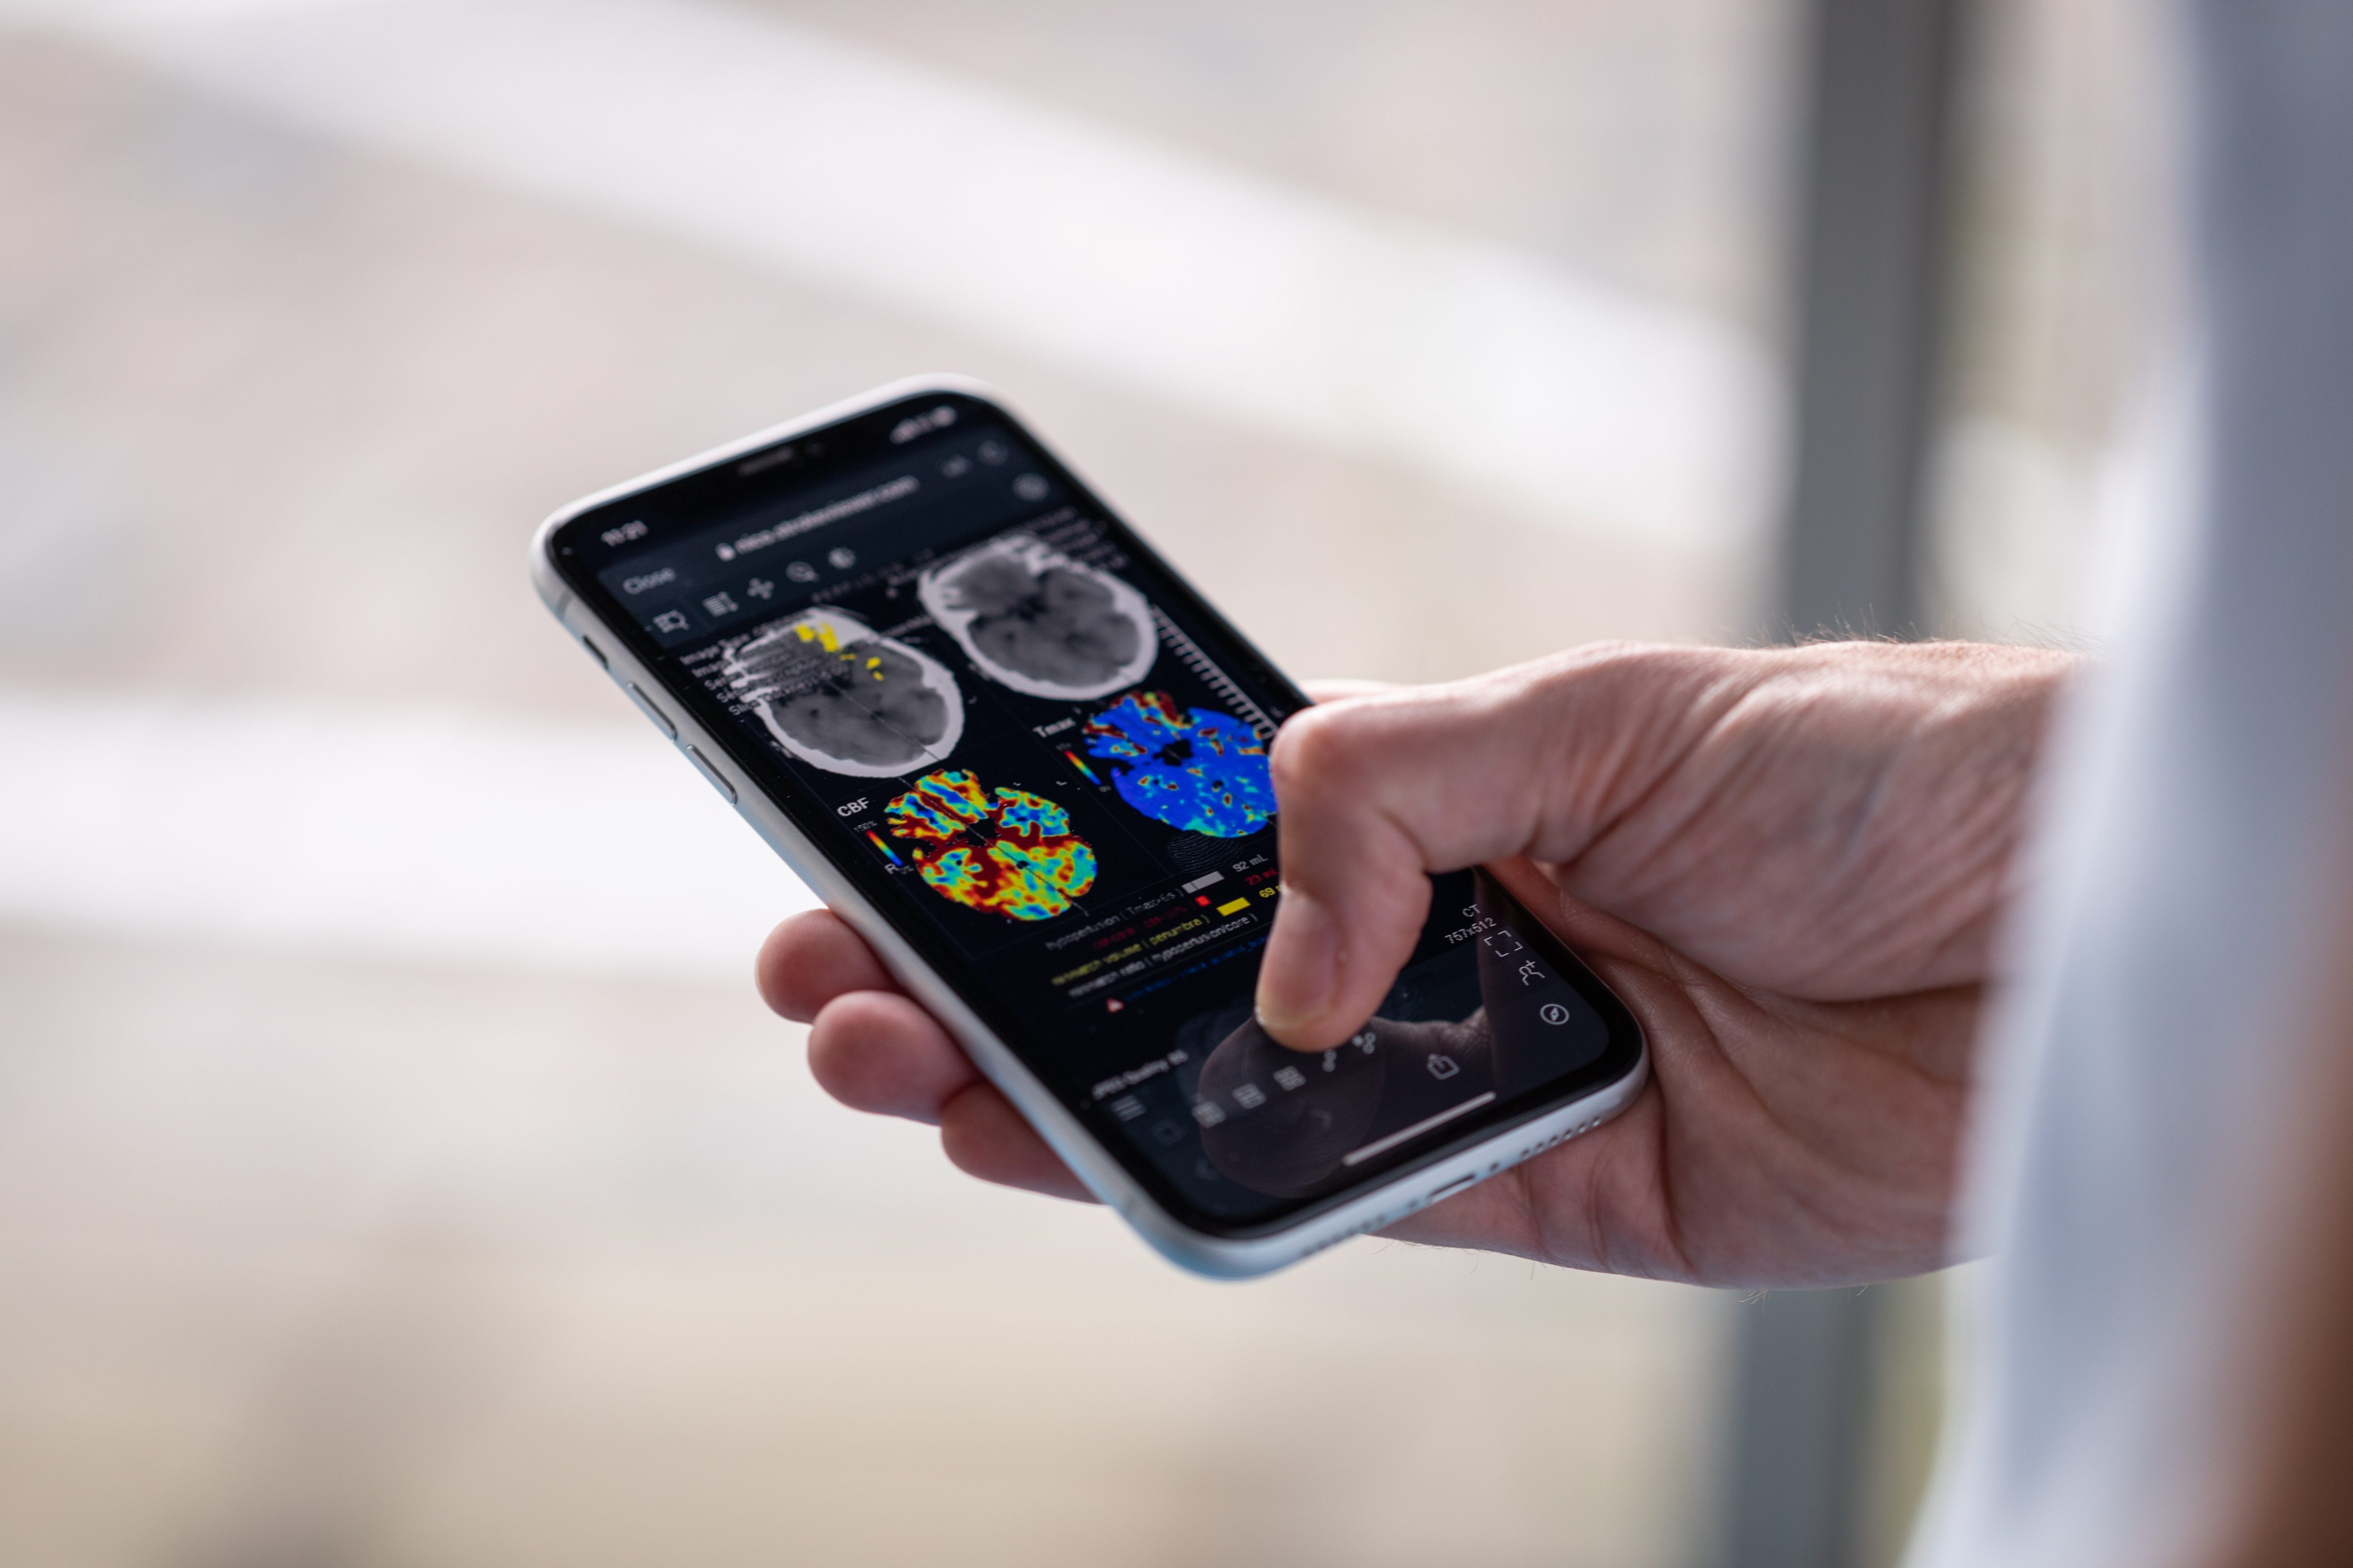 Nicolab Attains Significant Milestone in Stroke Care Advancement with U.S. FDA Clearance for CT Perfusion Algorithm in StrokeViewer